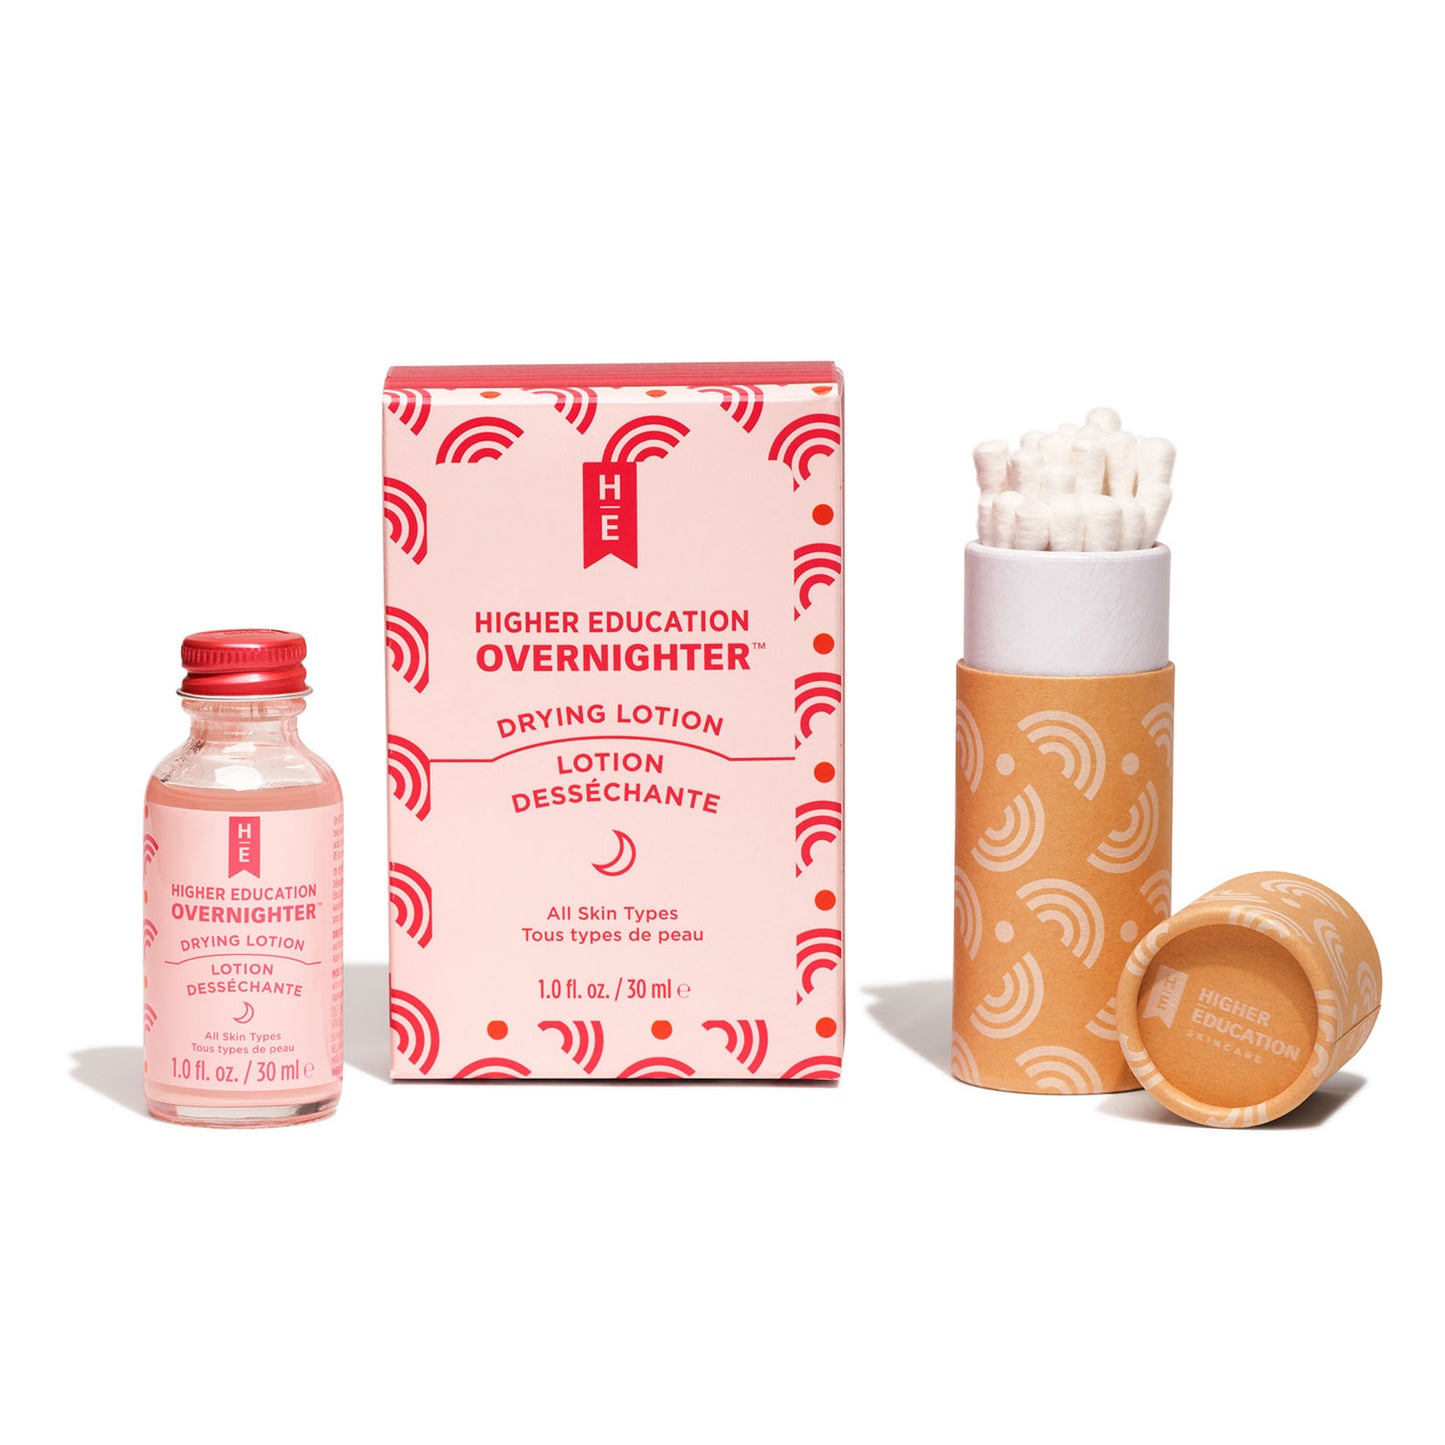 OVERNIGHTER® Drying Lotion